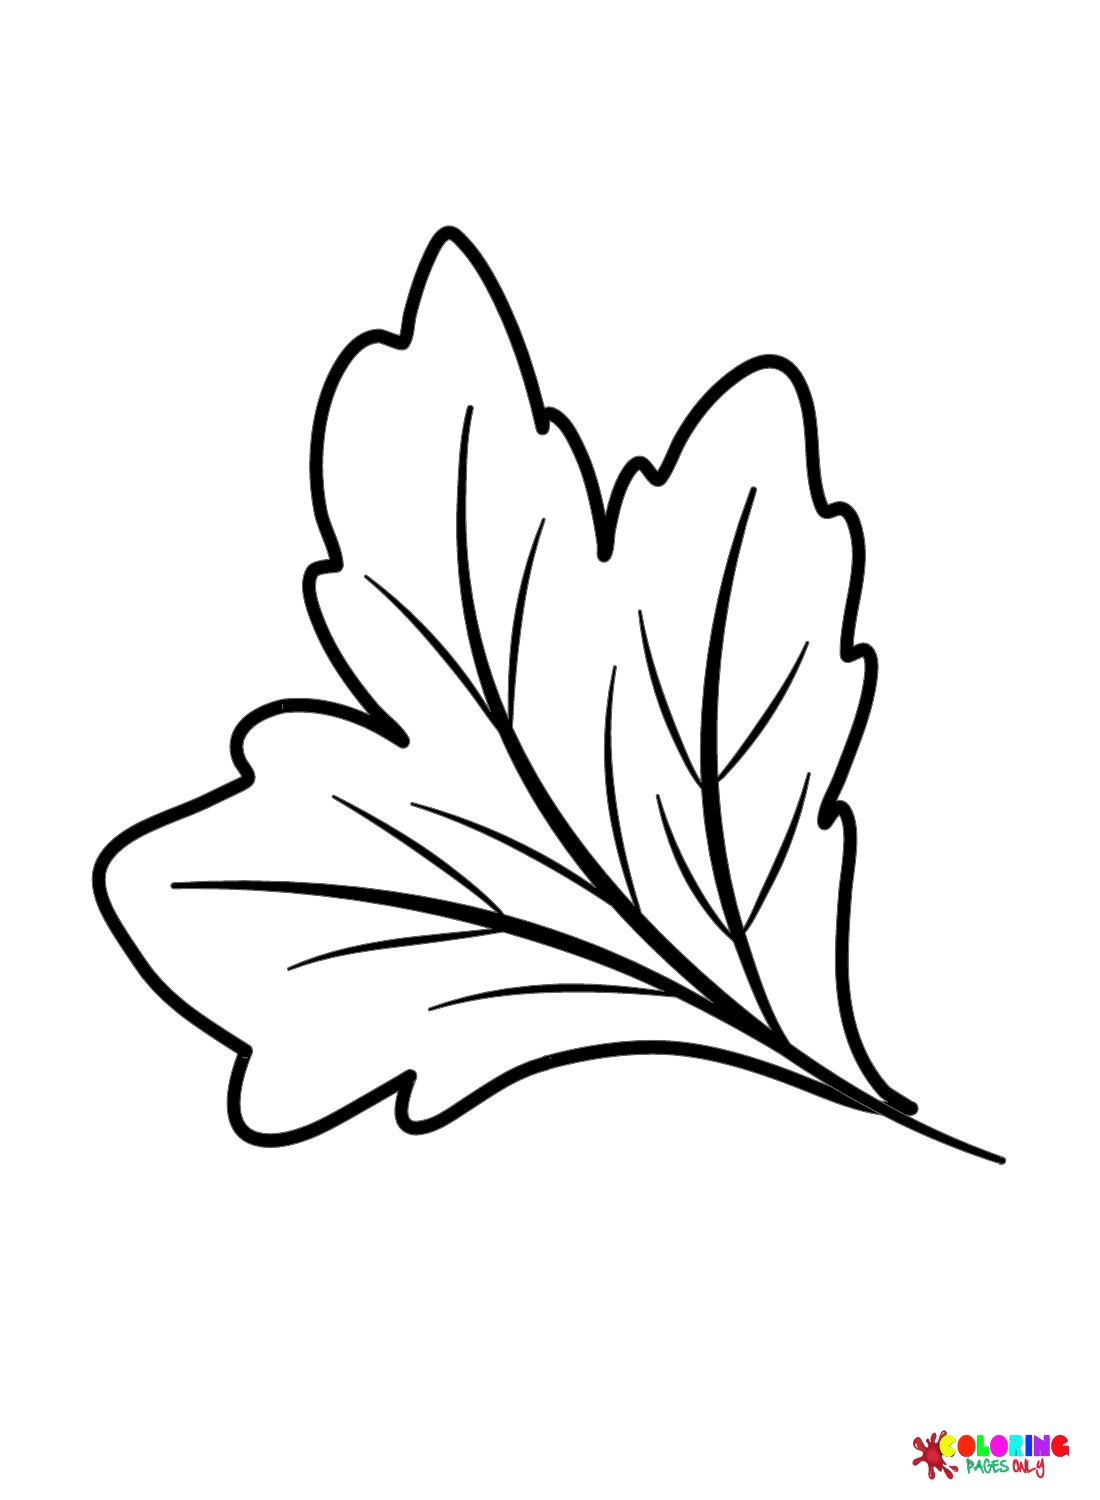 hawthorn-leaf-coloring-pages-leaves-coloring-pages-coloring-pages-for-kids-and-adults